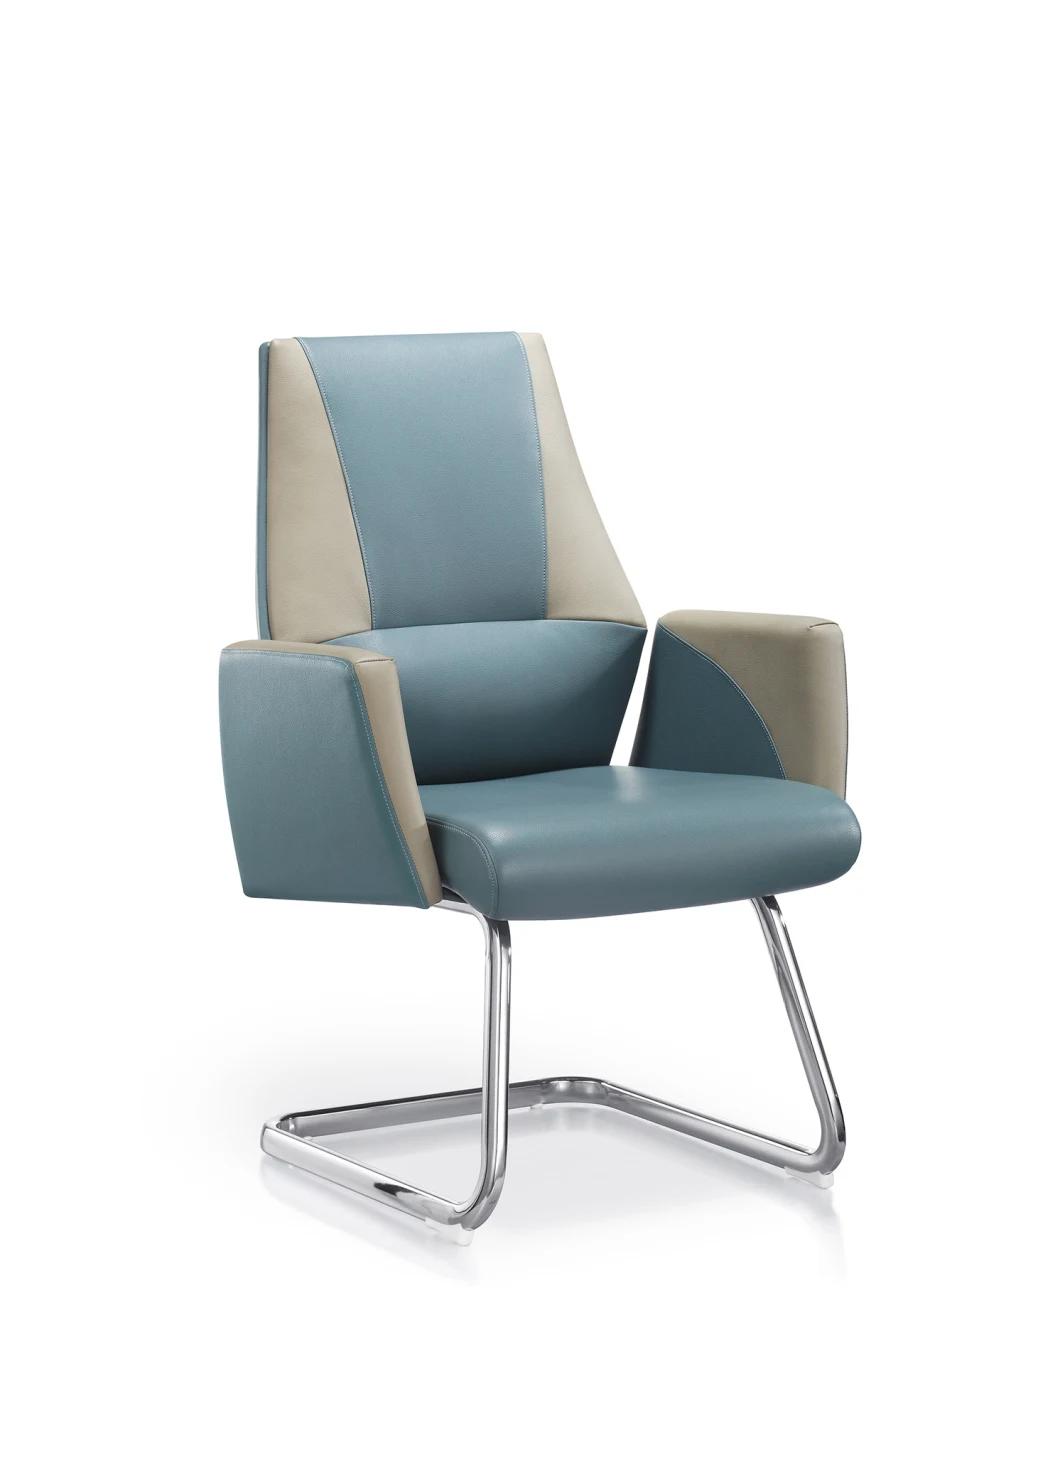 2022 New Design Conference Chair Meeting Chair Office Use